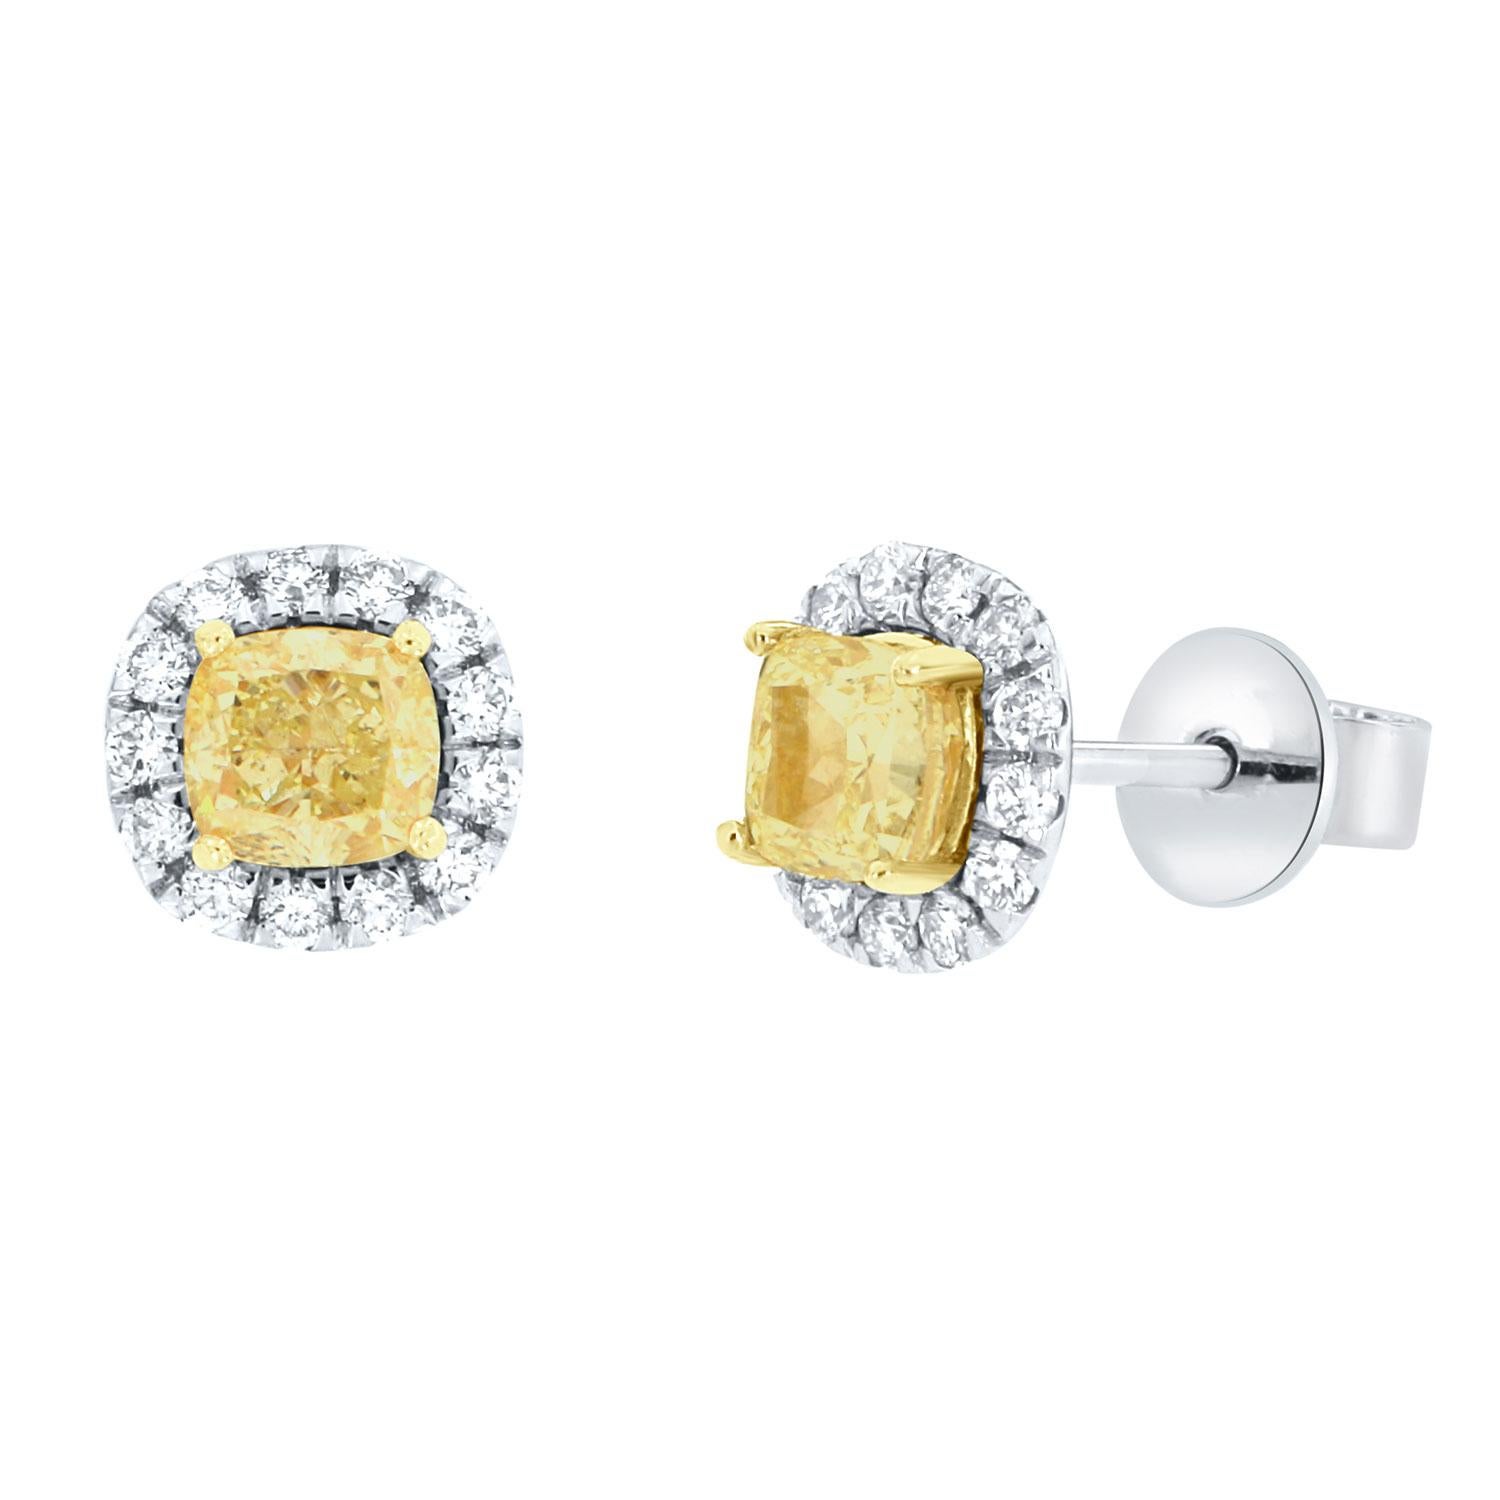 This 18k White gold and 22k yellow gold beautiful pair of halo earrings feature two Fancy Yellow cushion-shaped diamonds 1.40 Carat total weight encircled by one row of brilliant round diamonds.
The small white diamonds on the earrings are 0.33